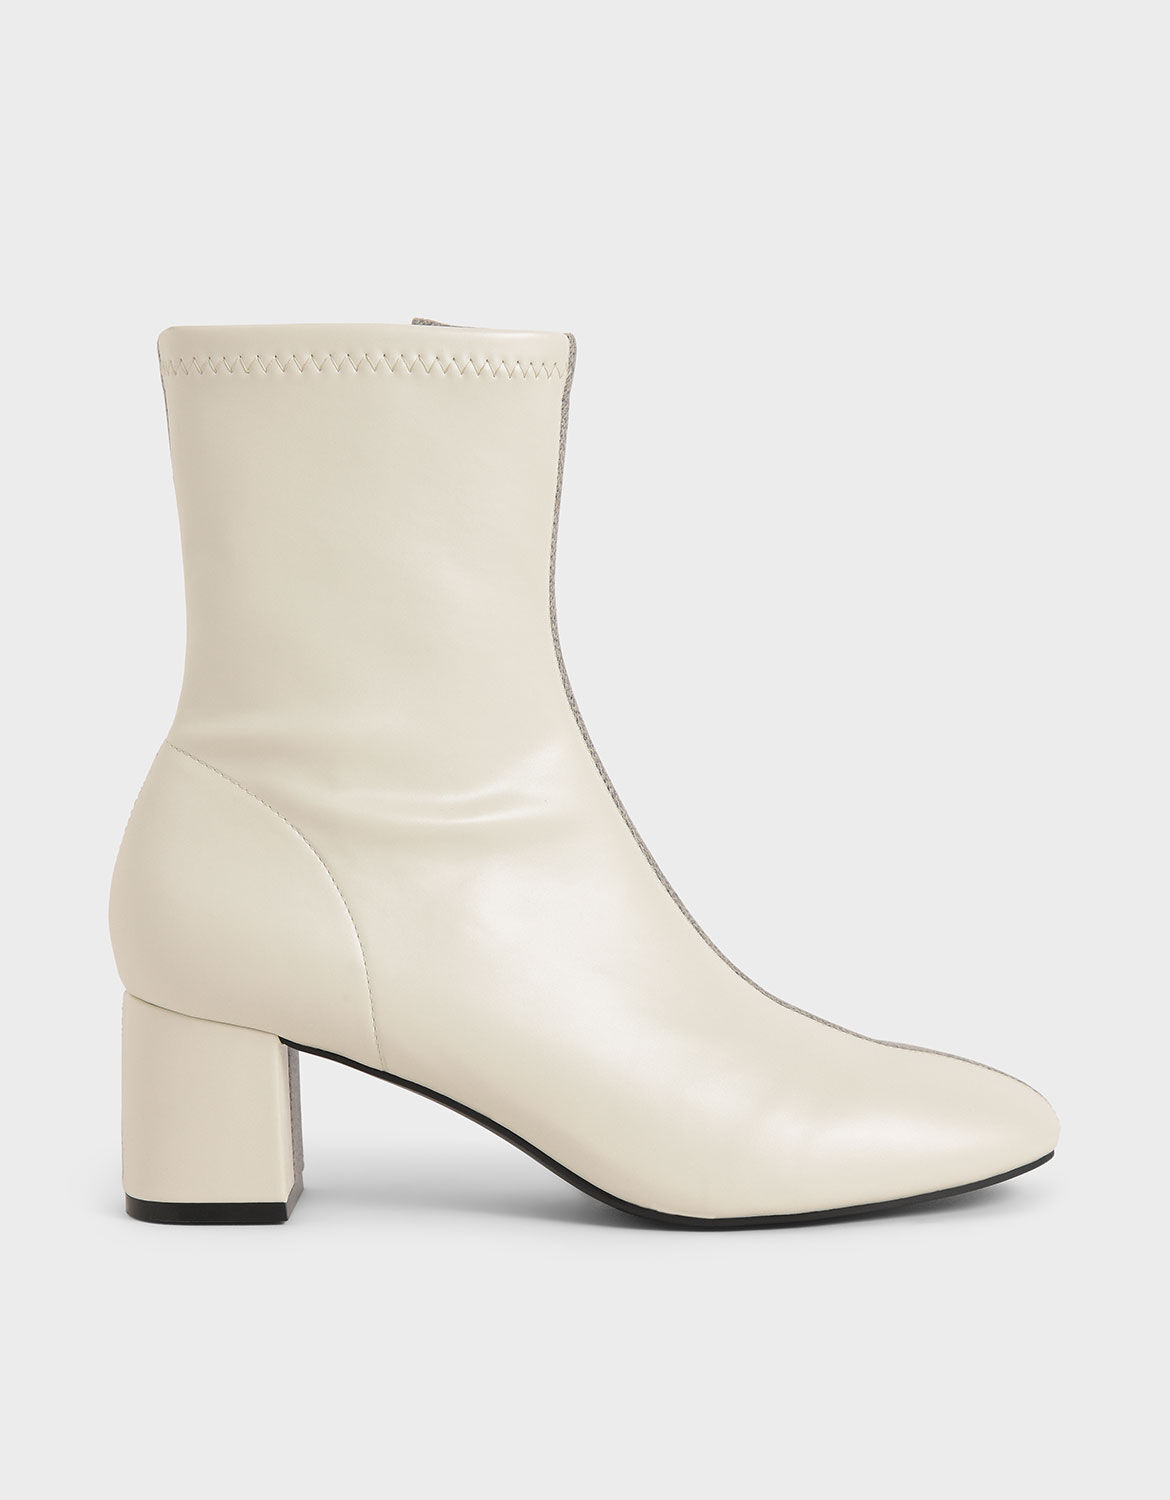 light grey ankle boots uk